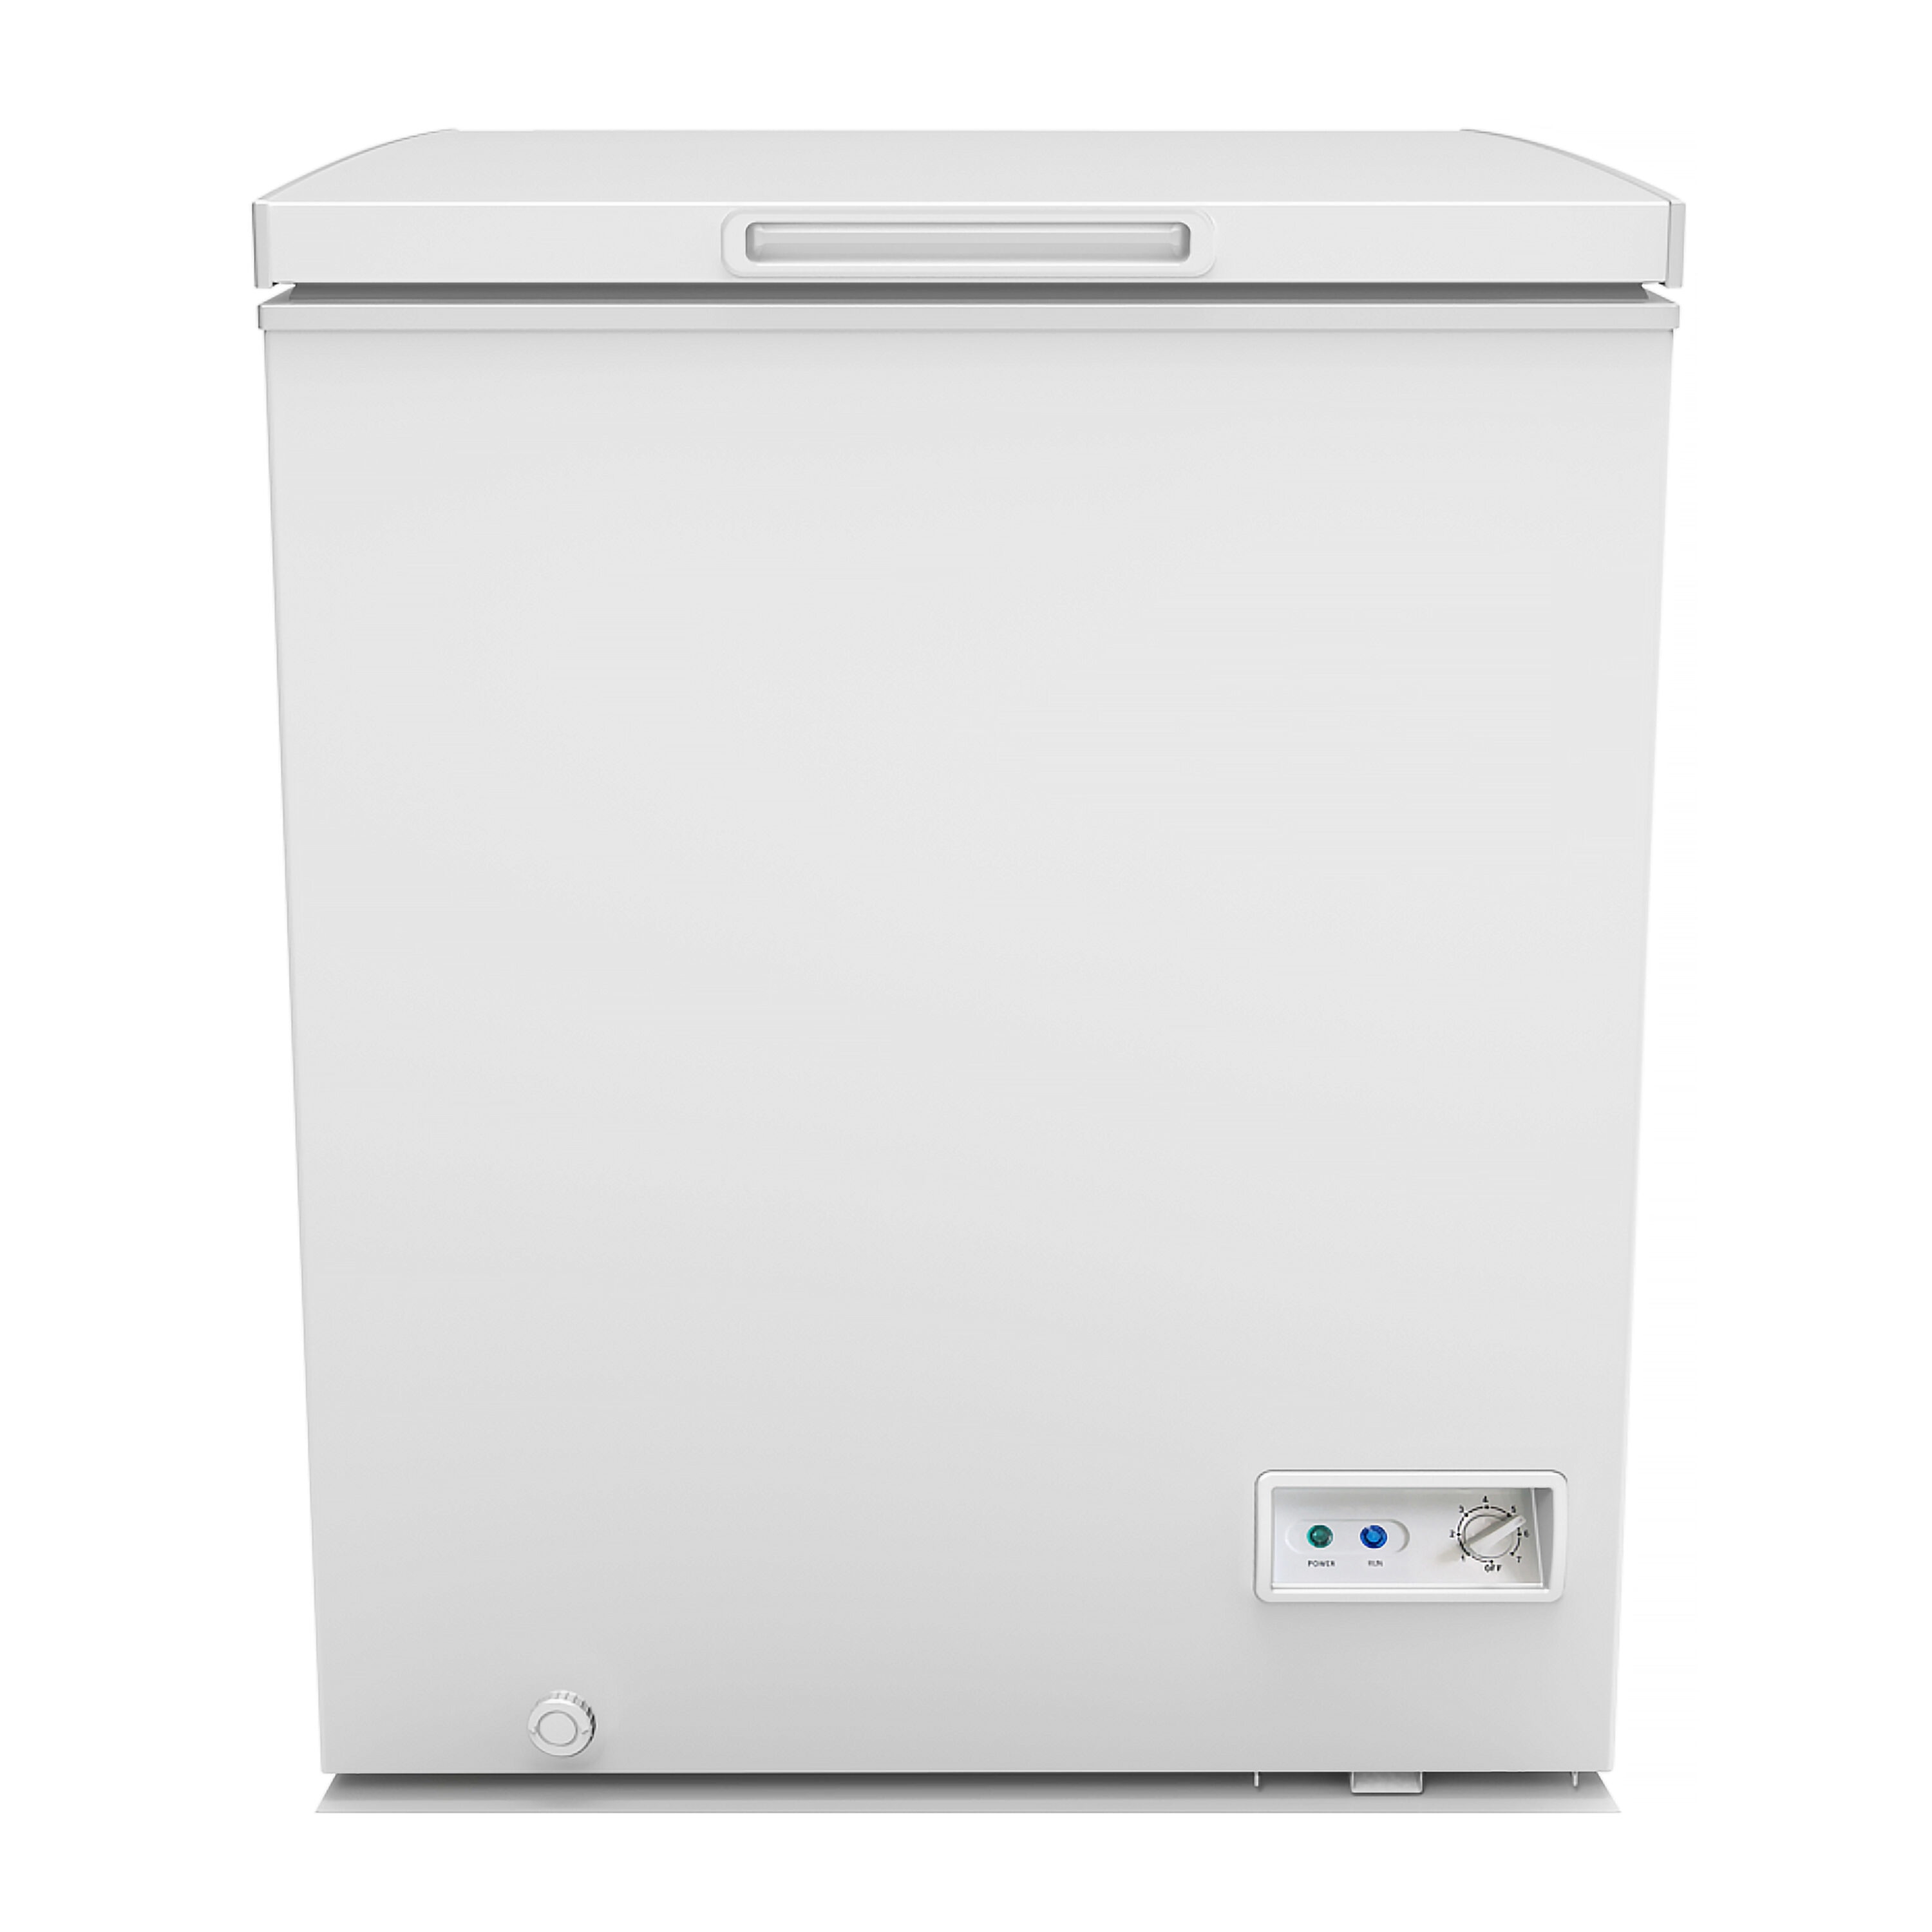 Honeywell 5 Cu Ft Chest Freezer with Removable Storage Basket, White - H5CFW